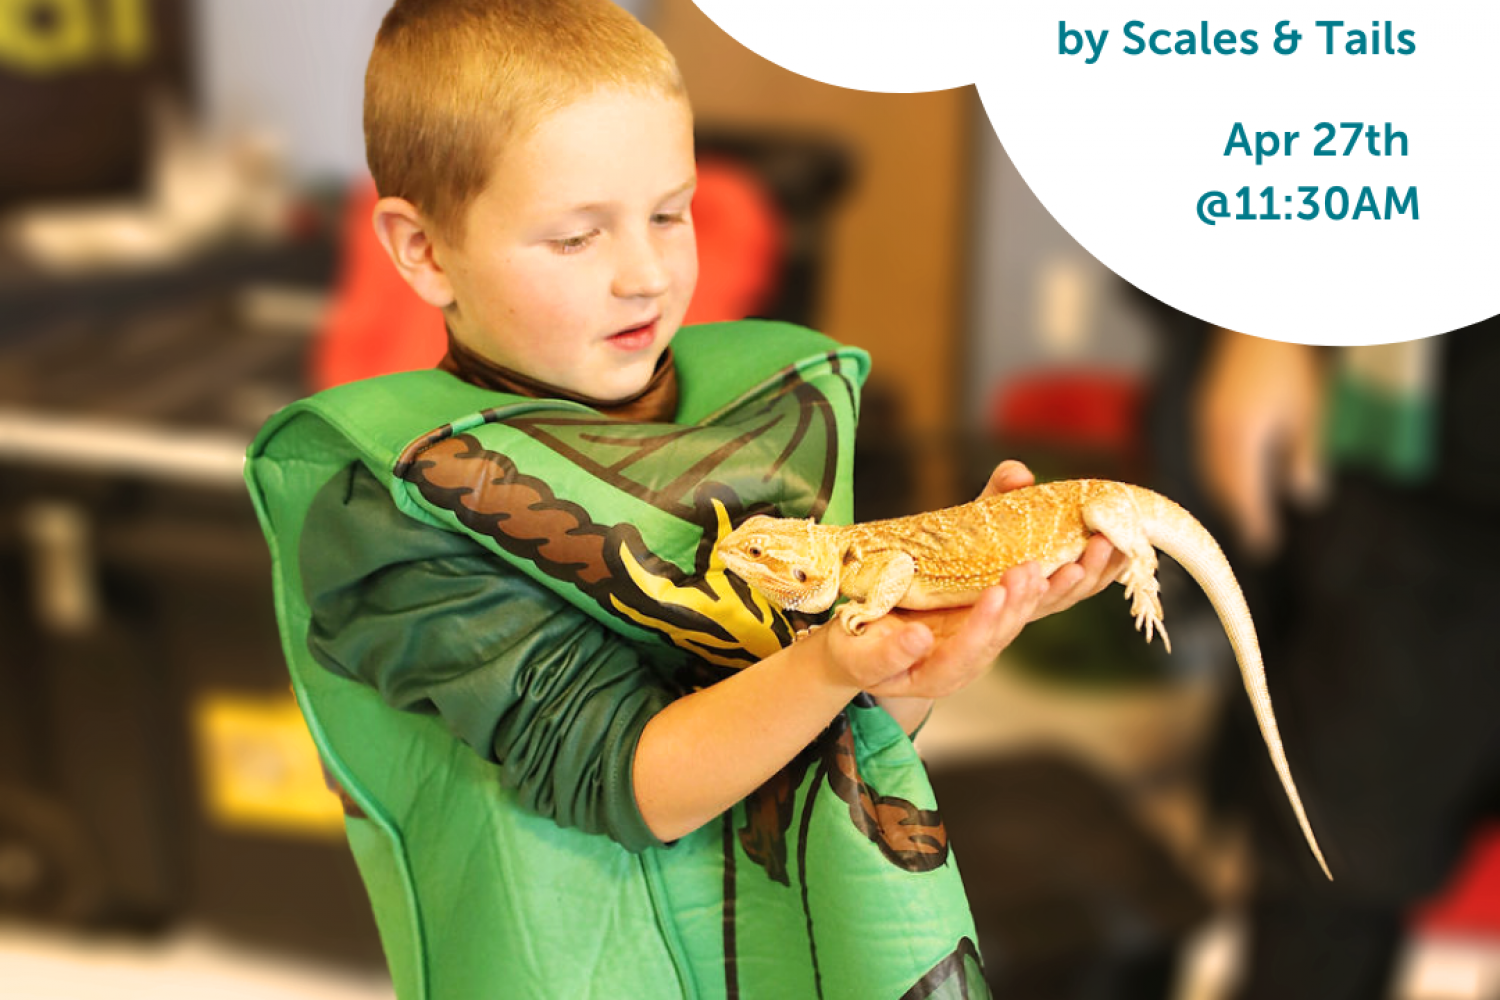 Reptile Show with Scales and Tails Utah